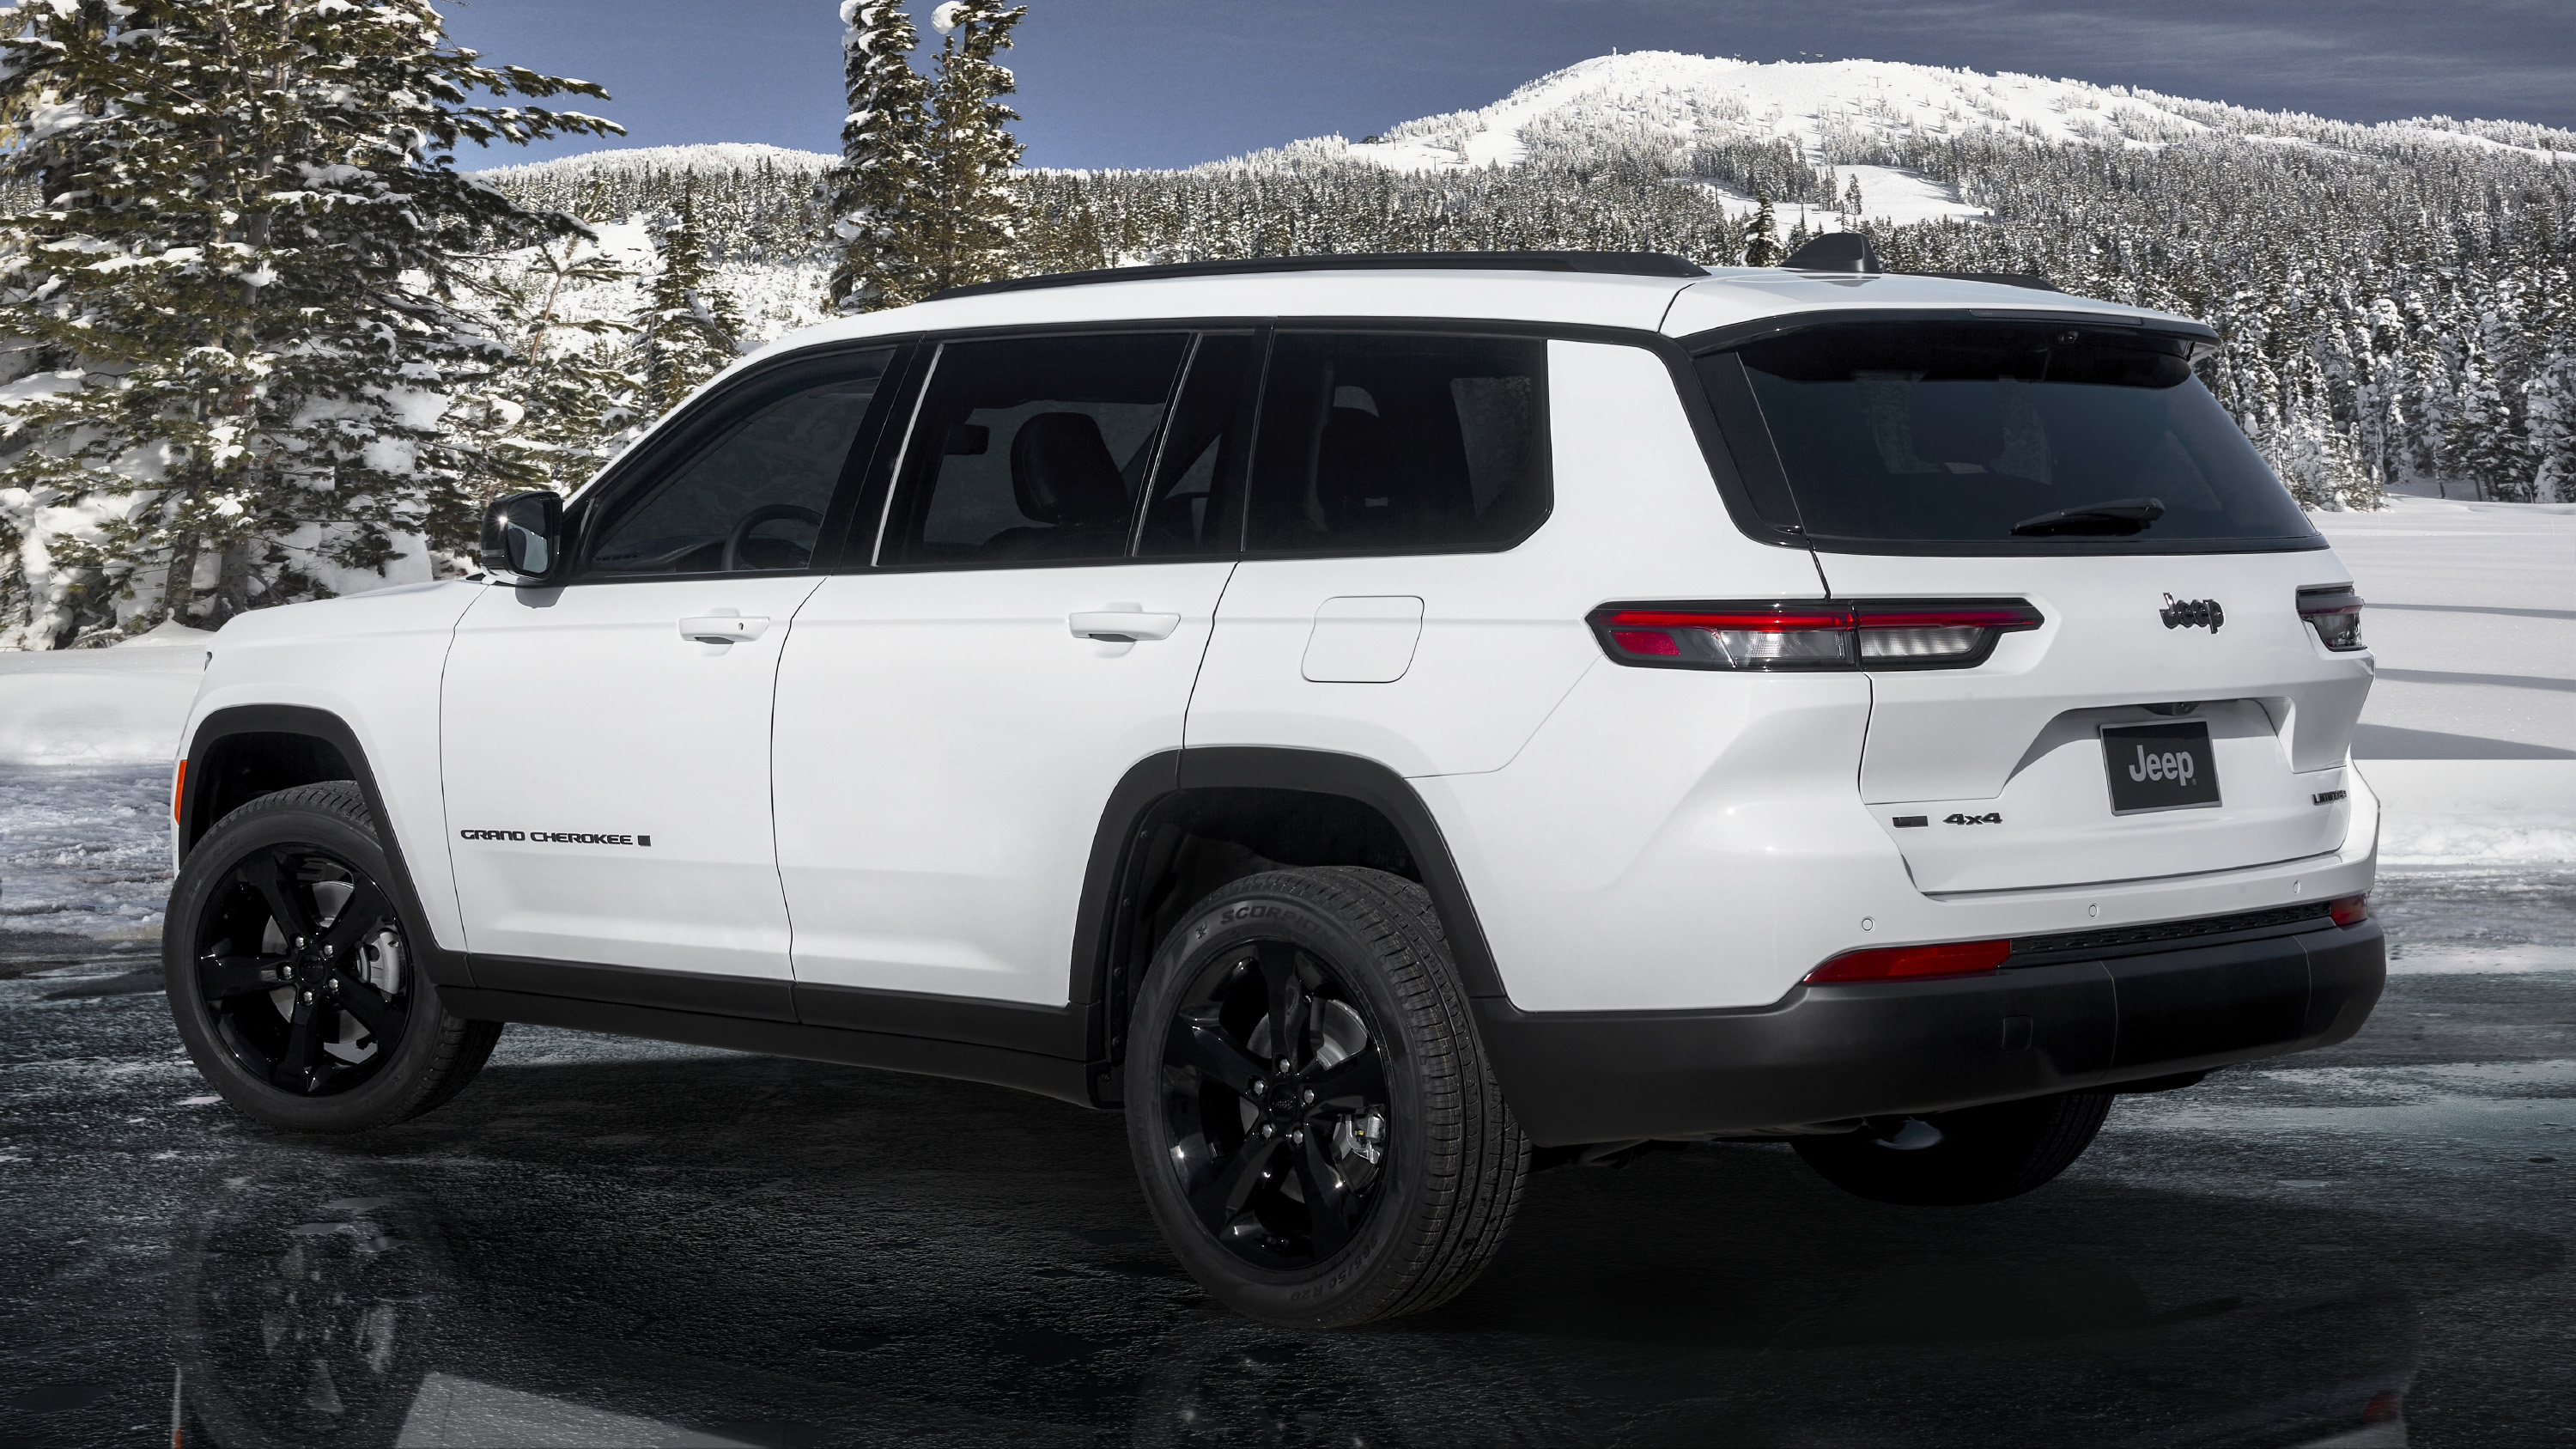 2022 Jeep Grand Cherokee L gets blackout package at Chicago Auto Show